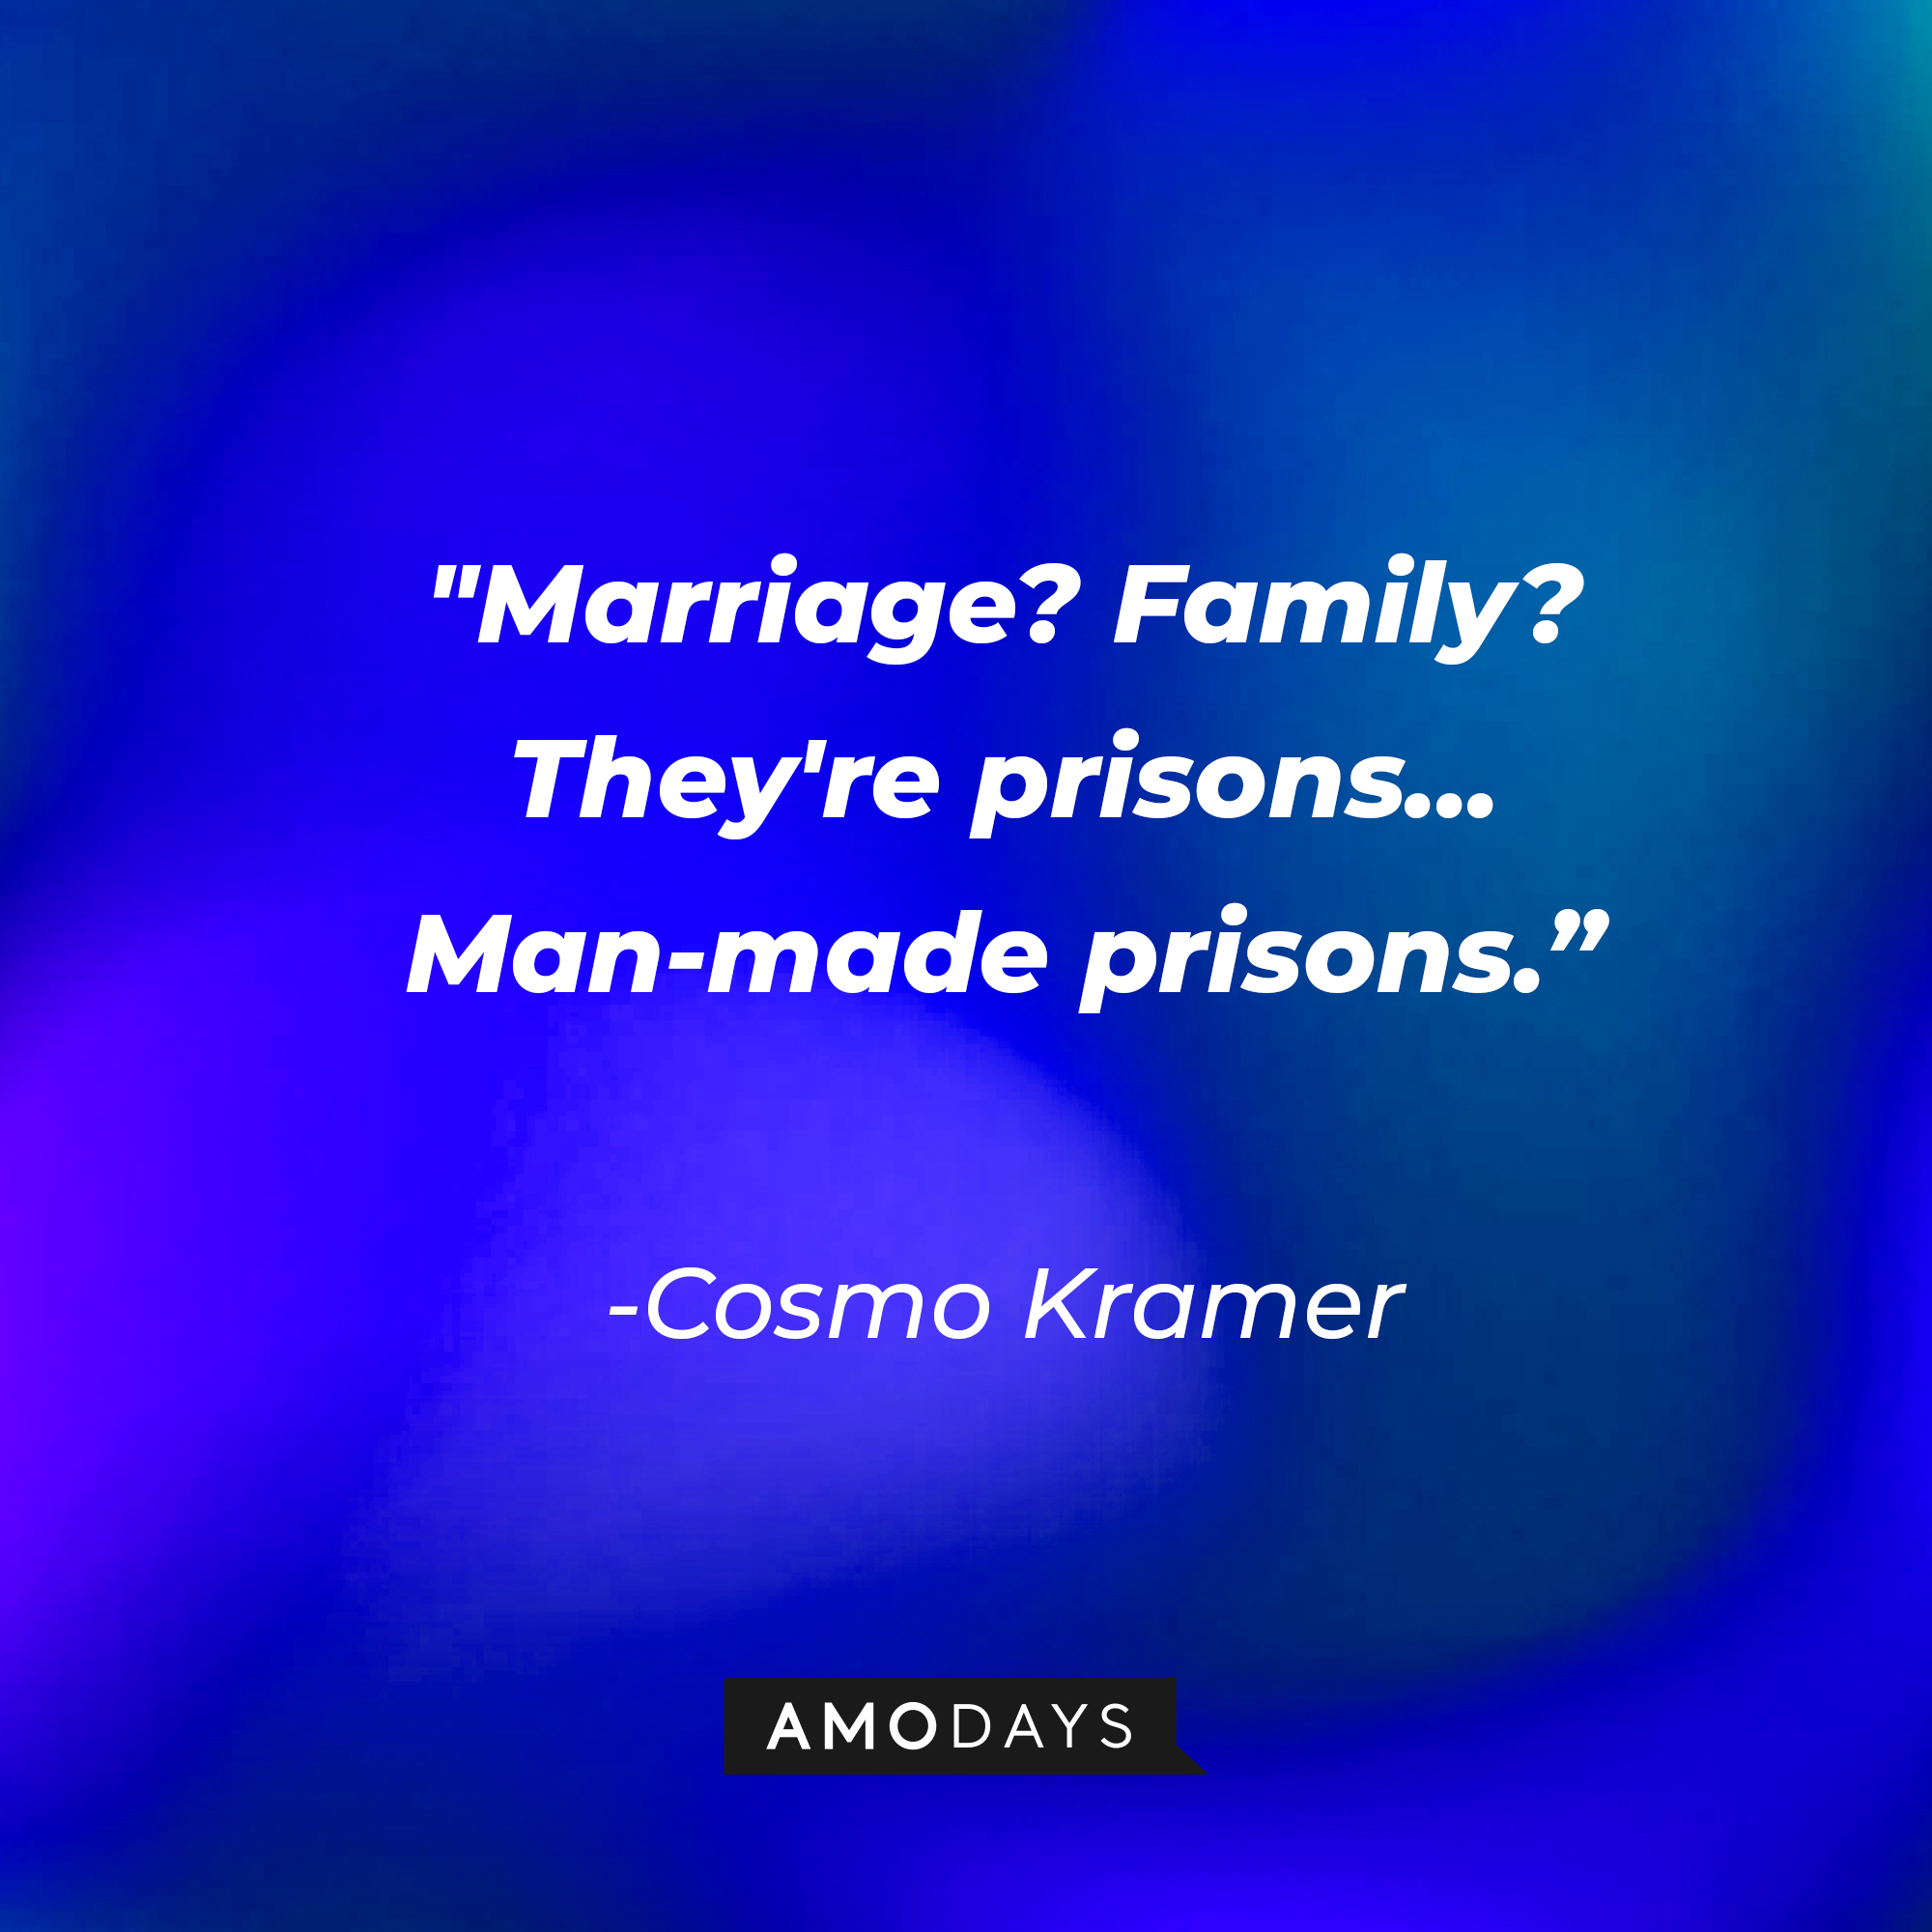 Cosmo Kramer’s quote: "Marriage? Family? They're prisons...Man-made prisons.” | Source: AmoDays